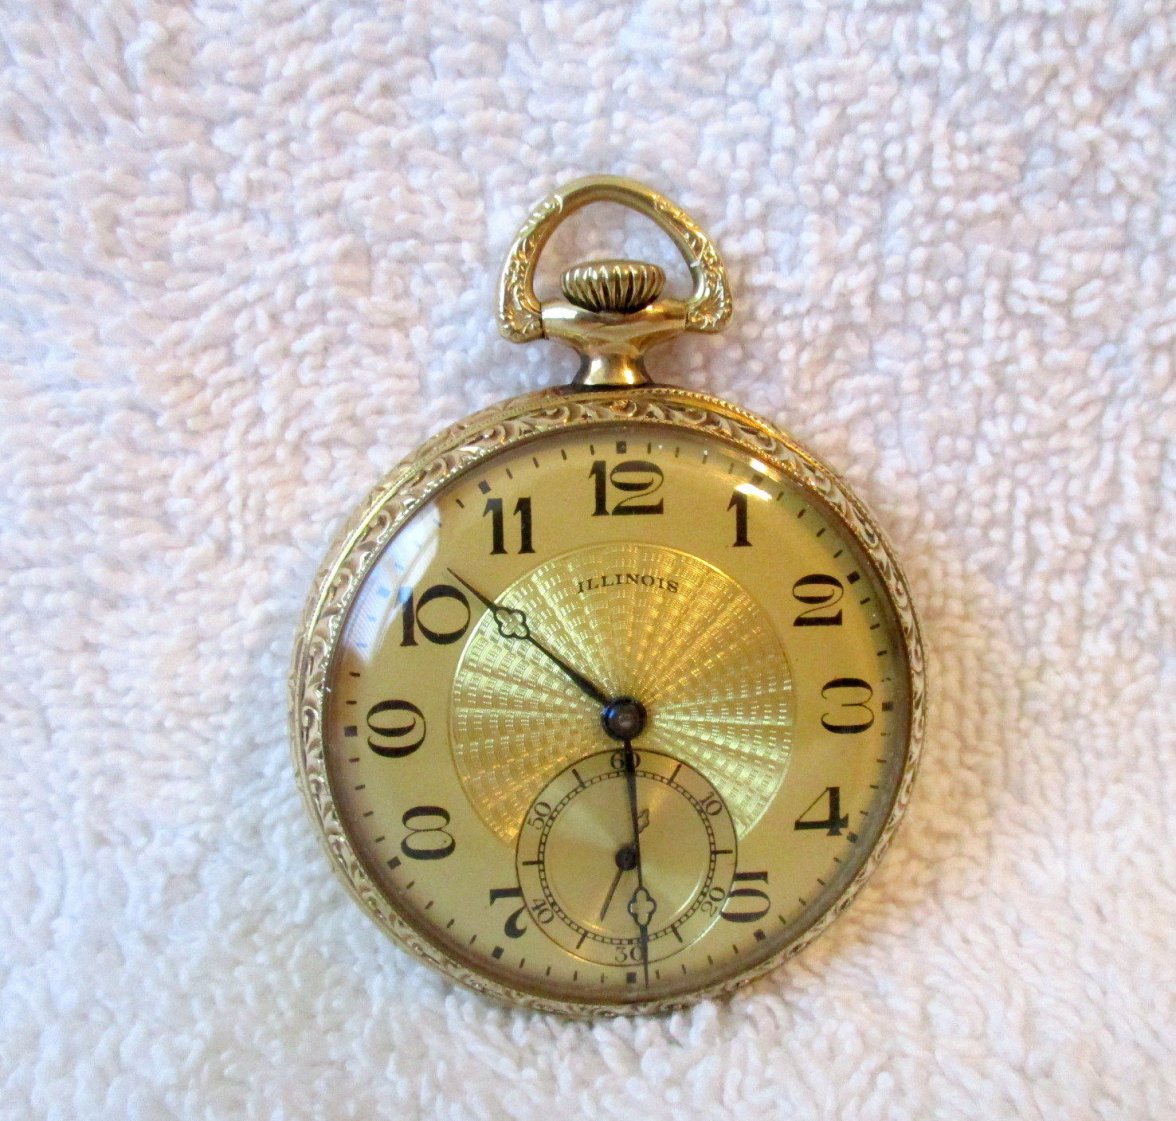 My first pocket watch and my first watch purchase from eBay | Omega Forums